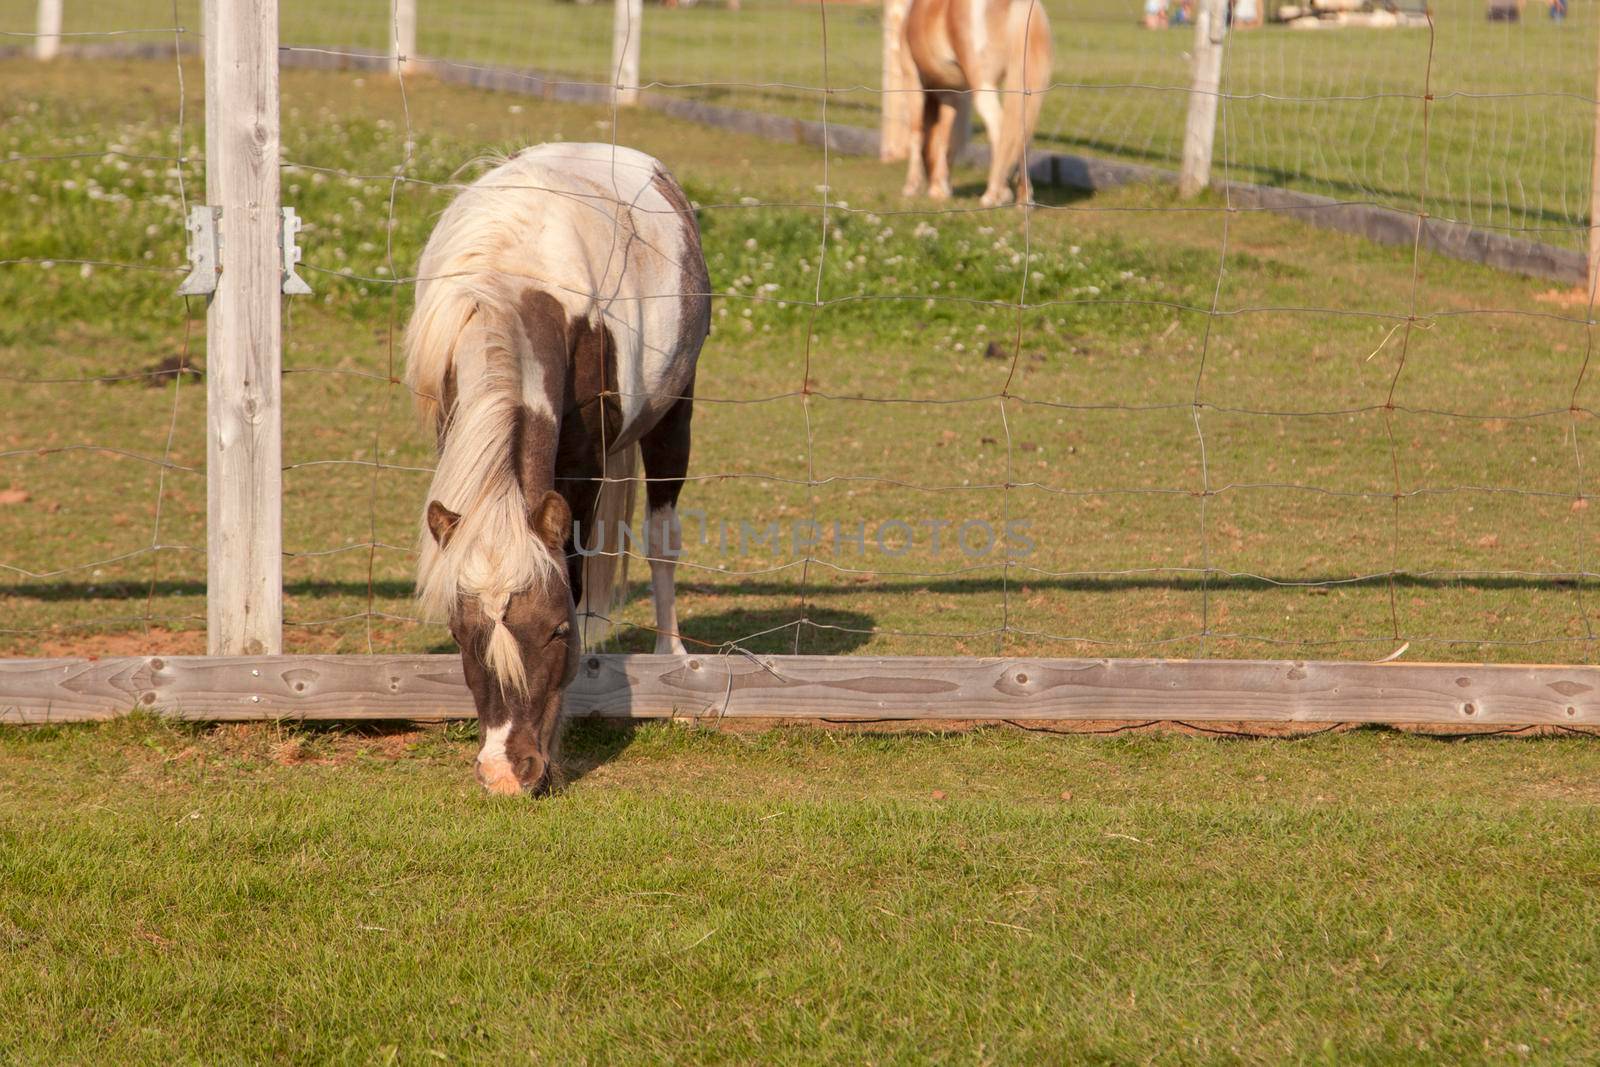 a pony having a grassy snack through a hole in the wire